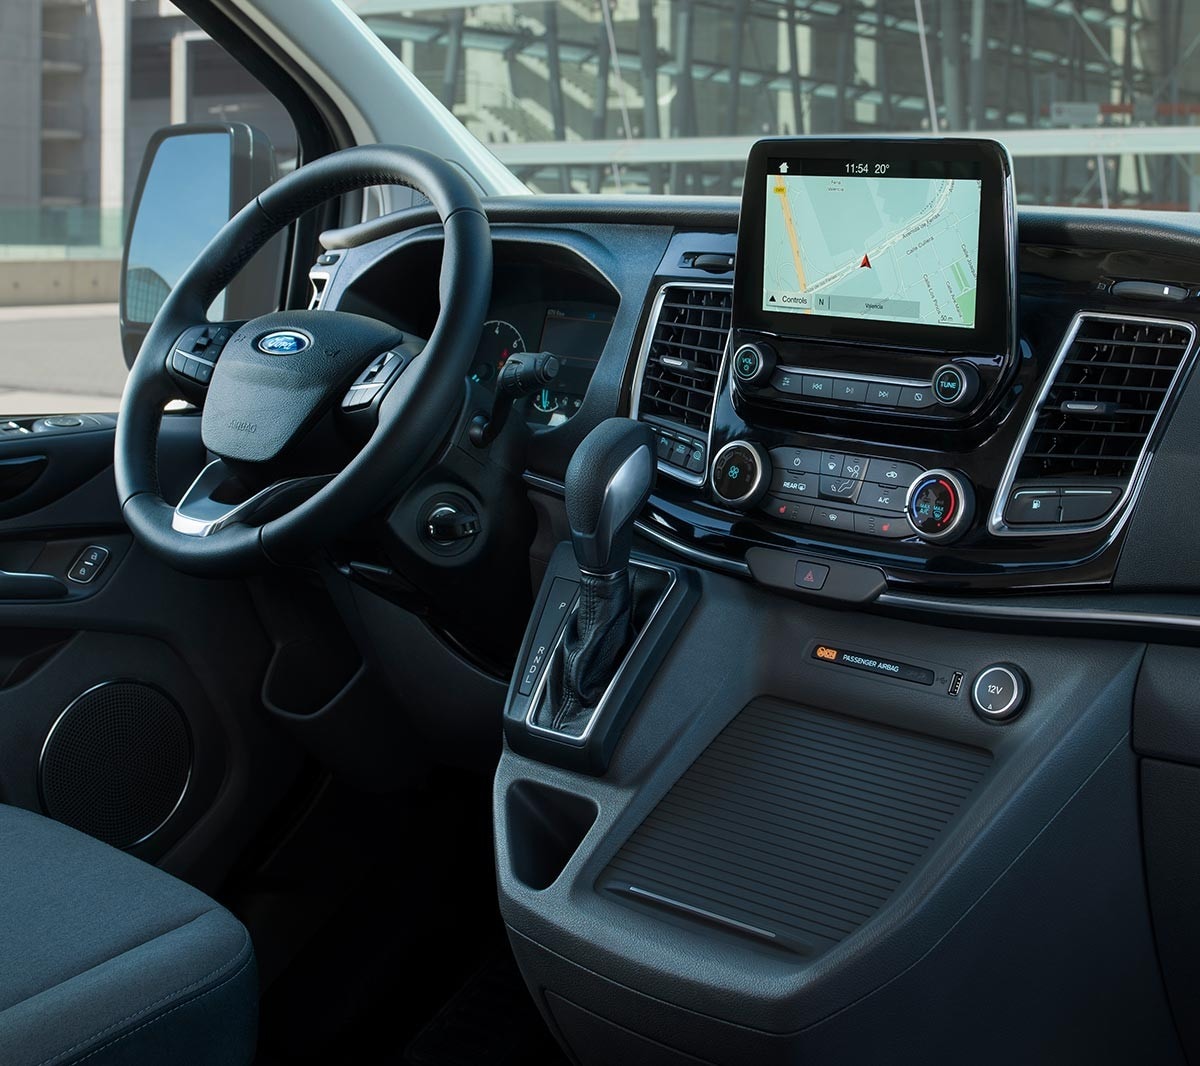 Ford Tourneo Custom interior with SYNC 3 showing